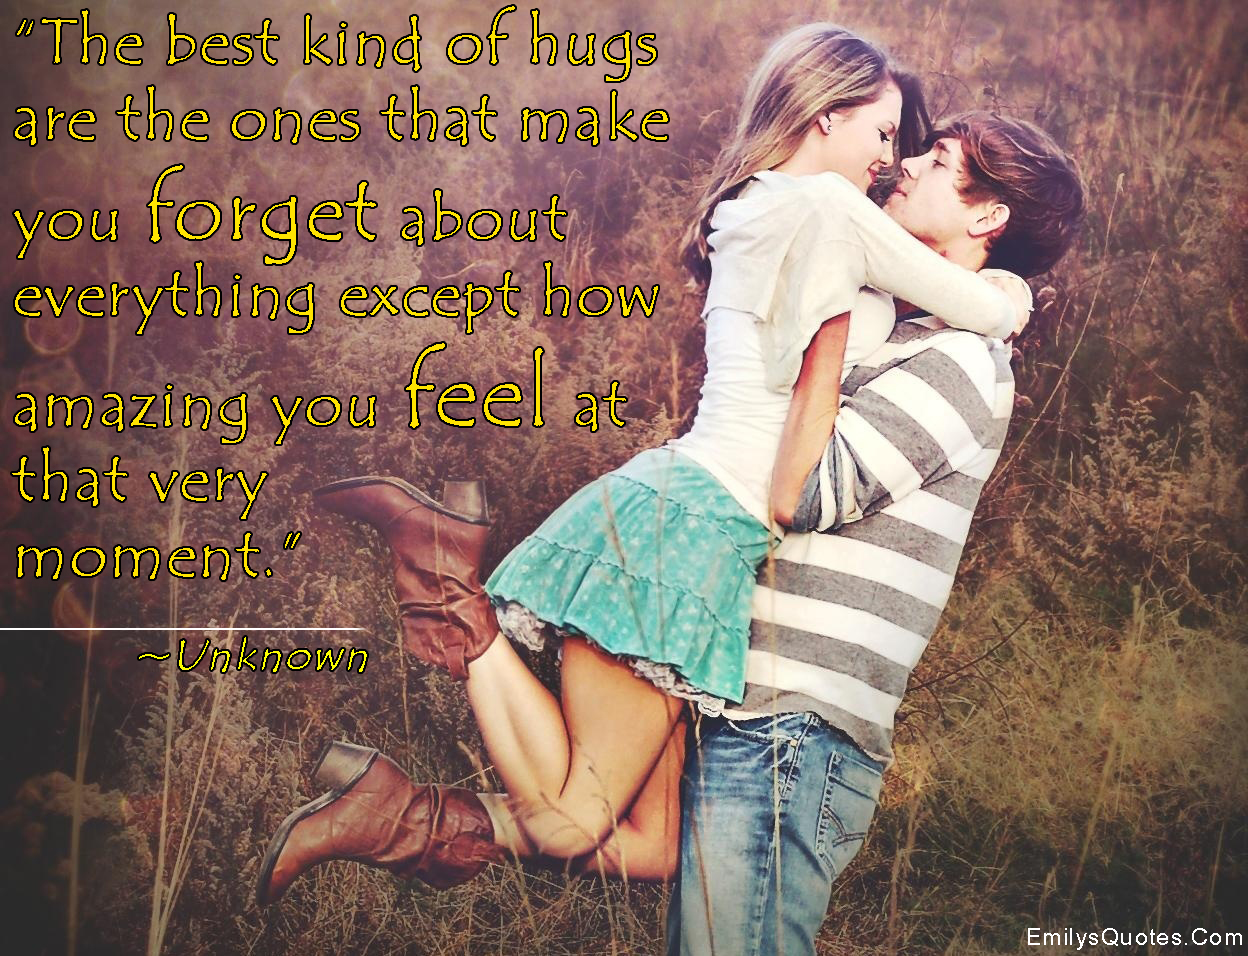 The best kind of hugs are the ones that make you forget about everything except how amazing you feel at that very moment